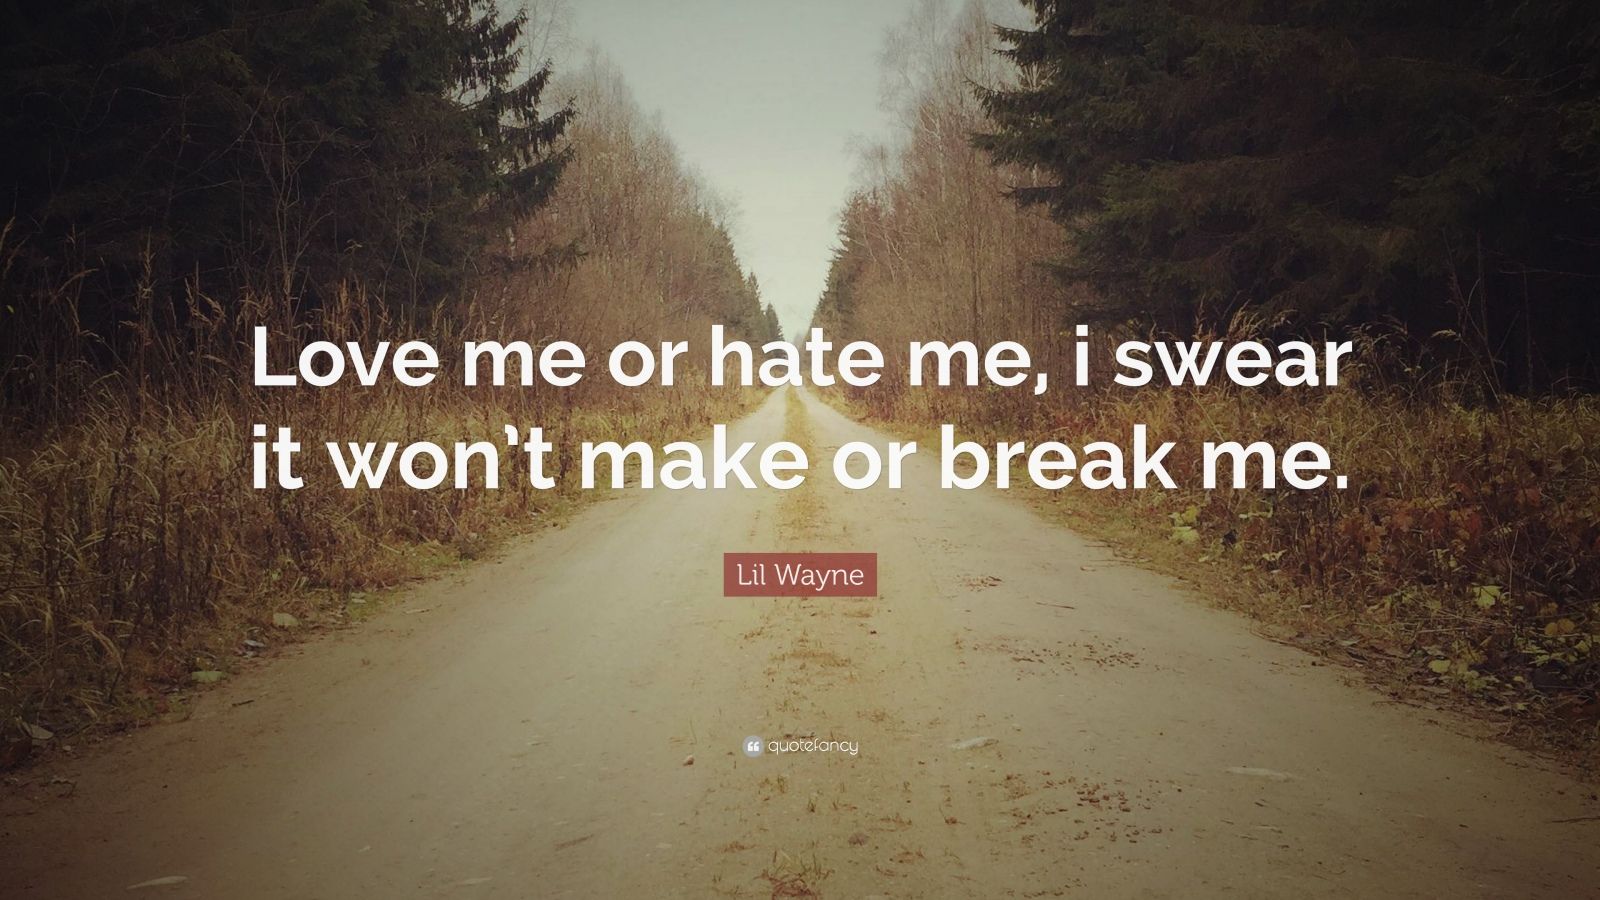 Lil Wayne Quote: “Love me or hate me, i swear it won't make or ...